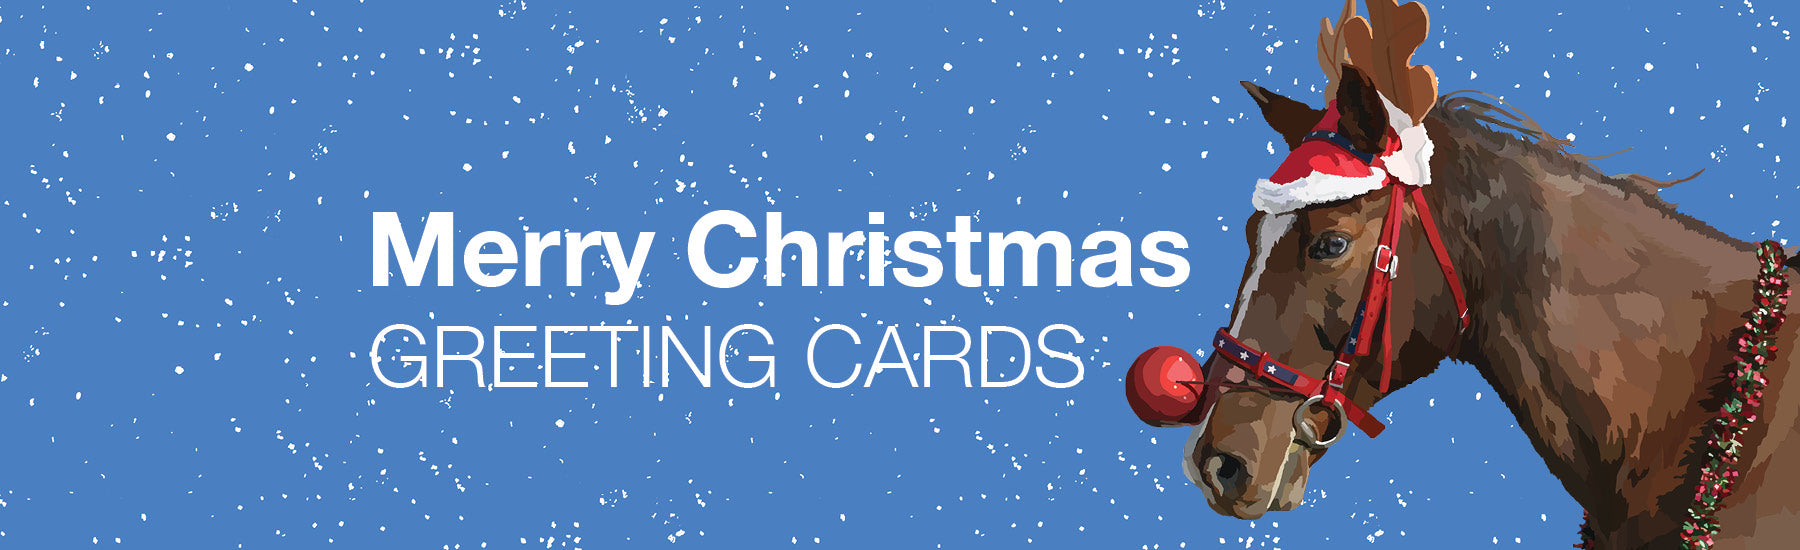 WINTER GREETING CARDS